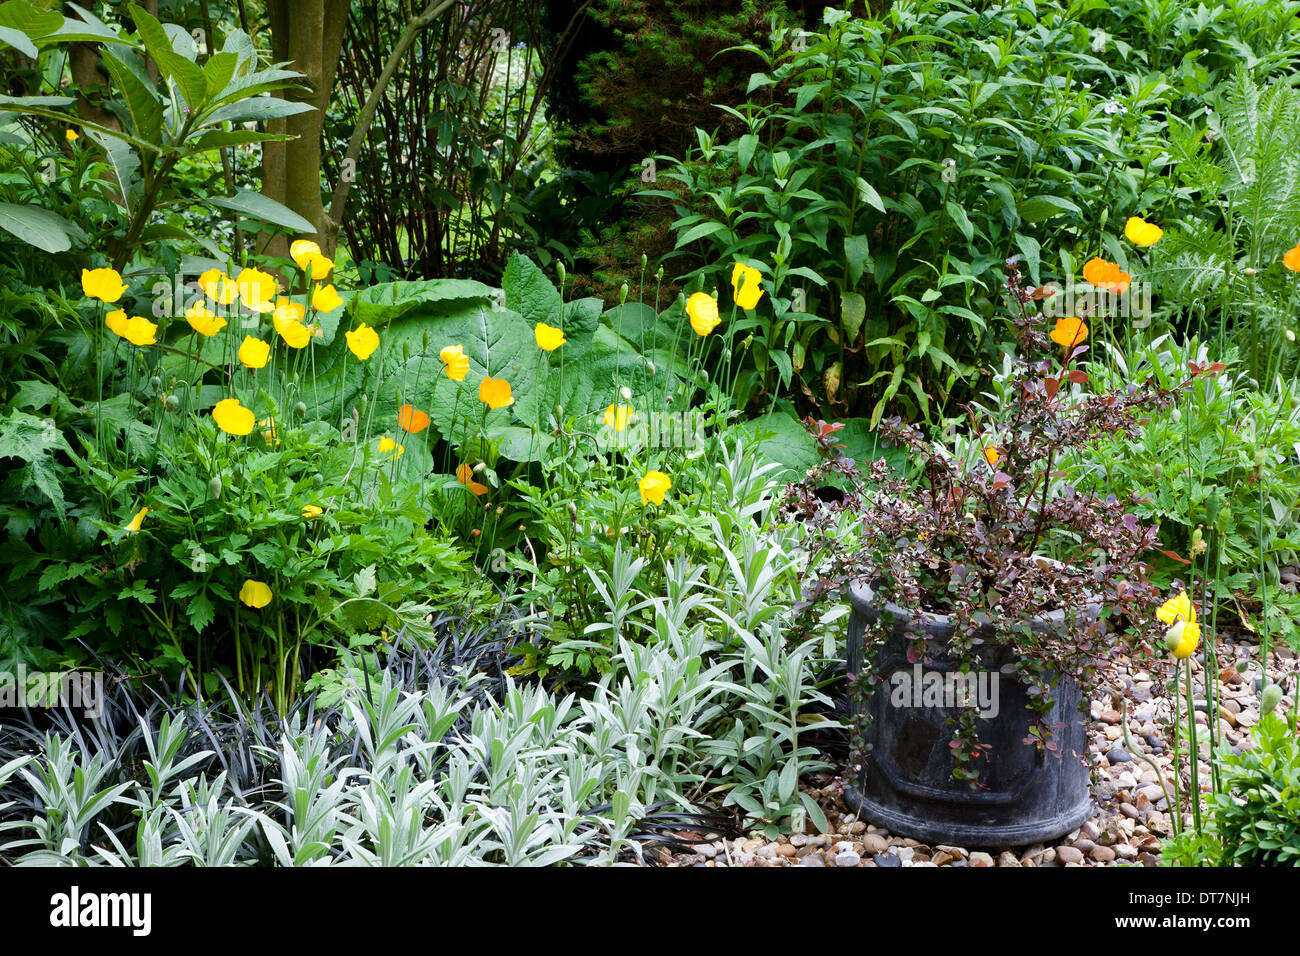 Welsh poppies (Meconopsis cambrica) with black and white foliage, and pot containing red berberis. Stock Photo